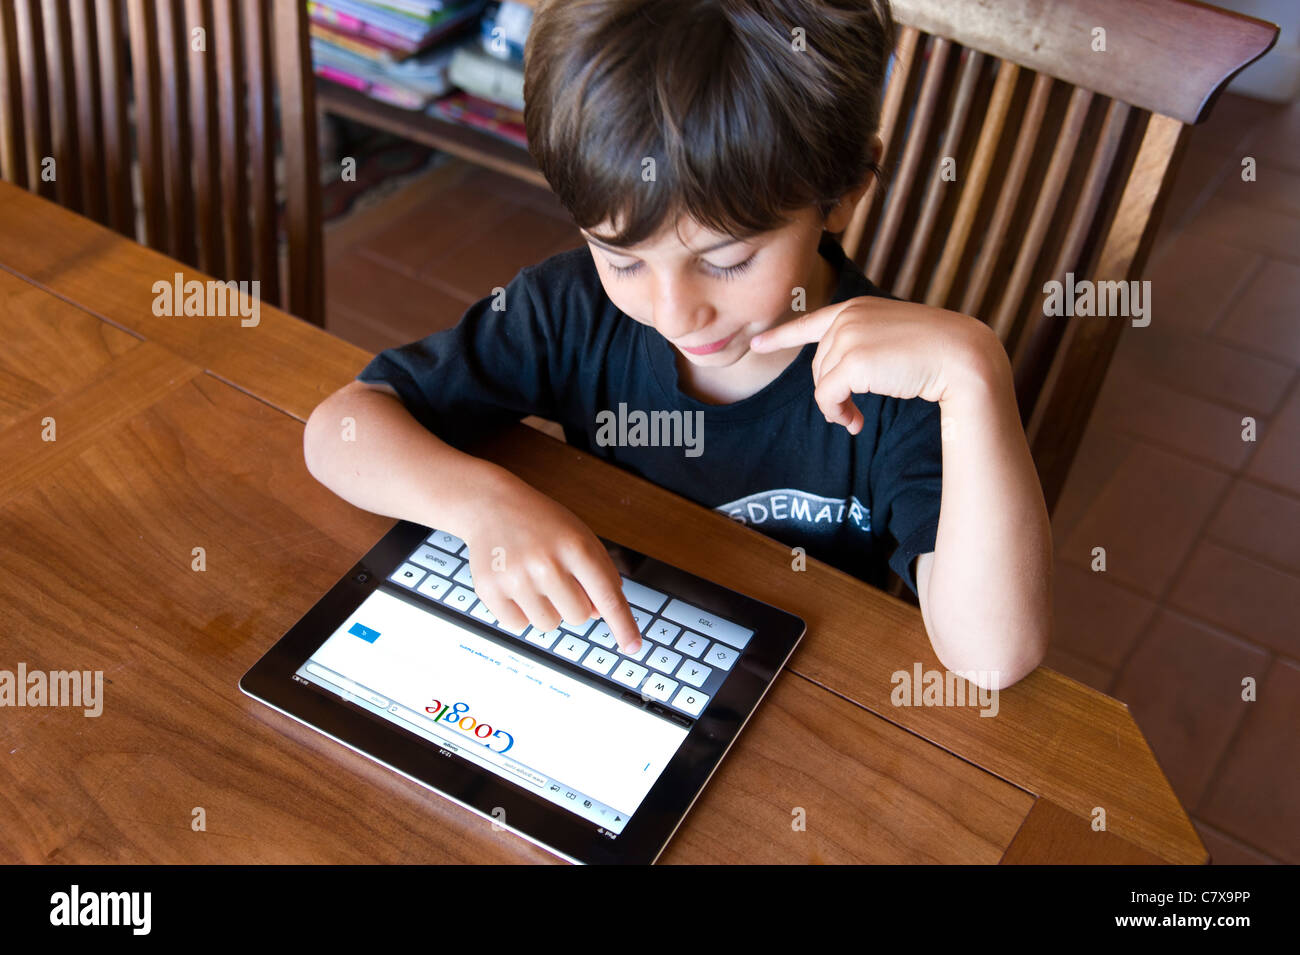 Child using Apple iPad 2 tablet computer at home Stock Photo